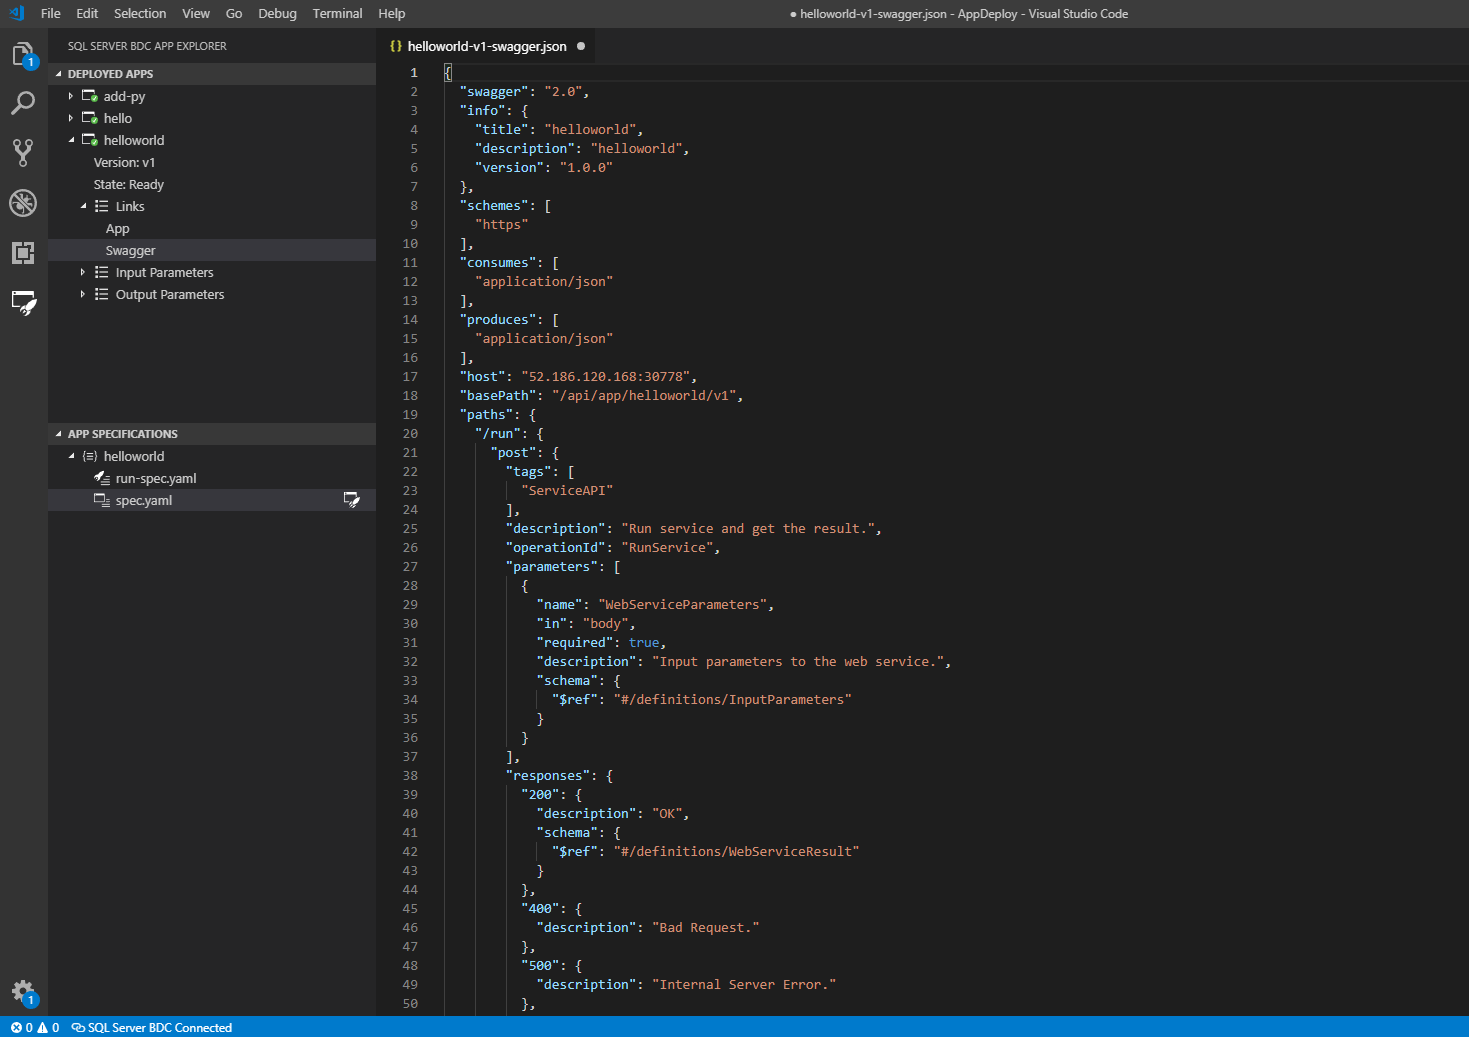 A Screenshot that shows the Visual Studio Code UI displaying the swagger.json file.